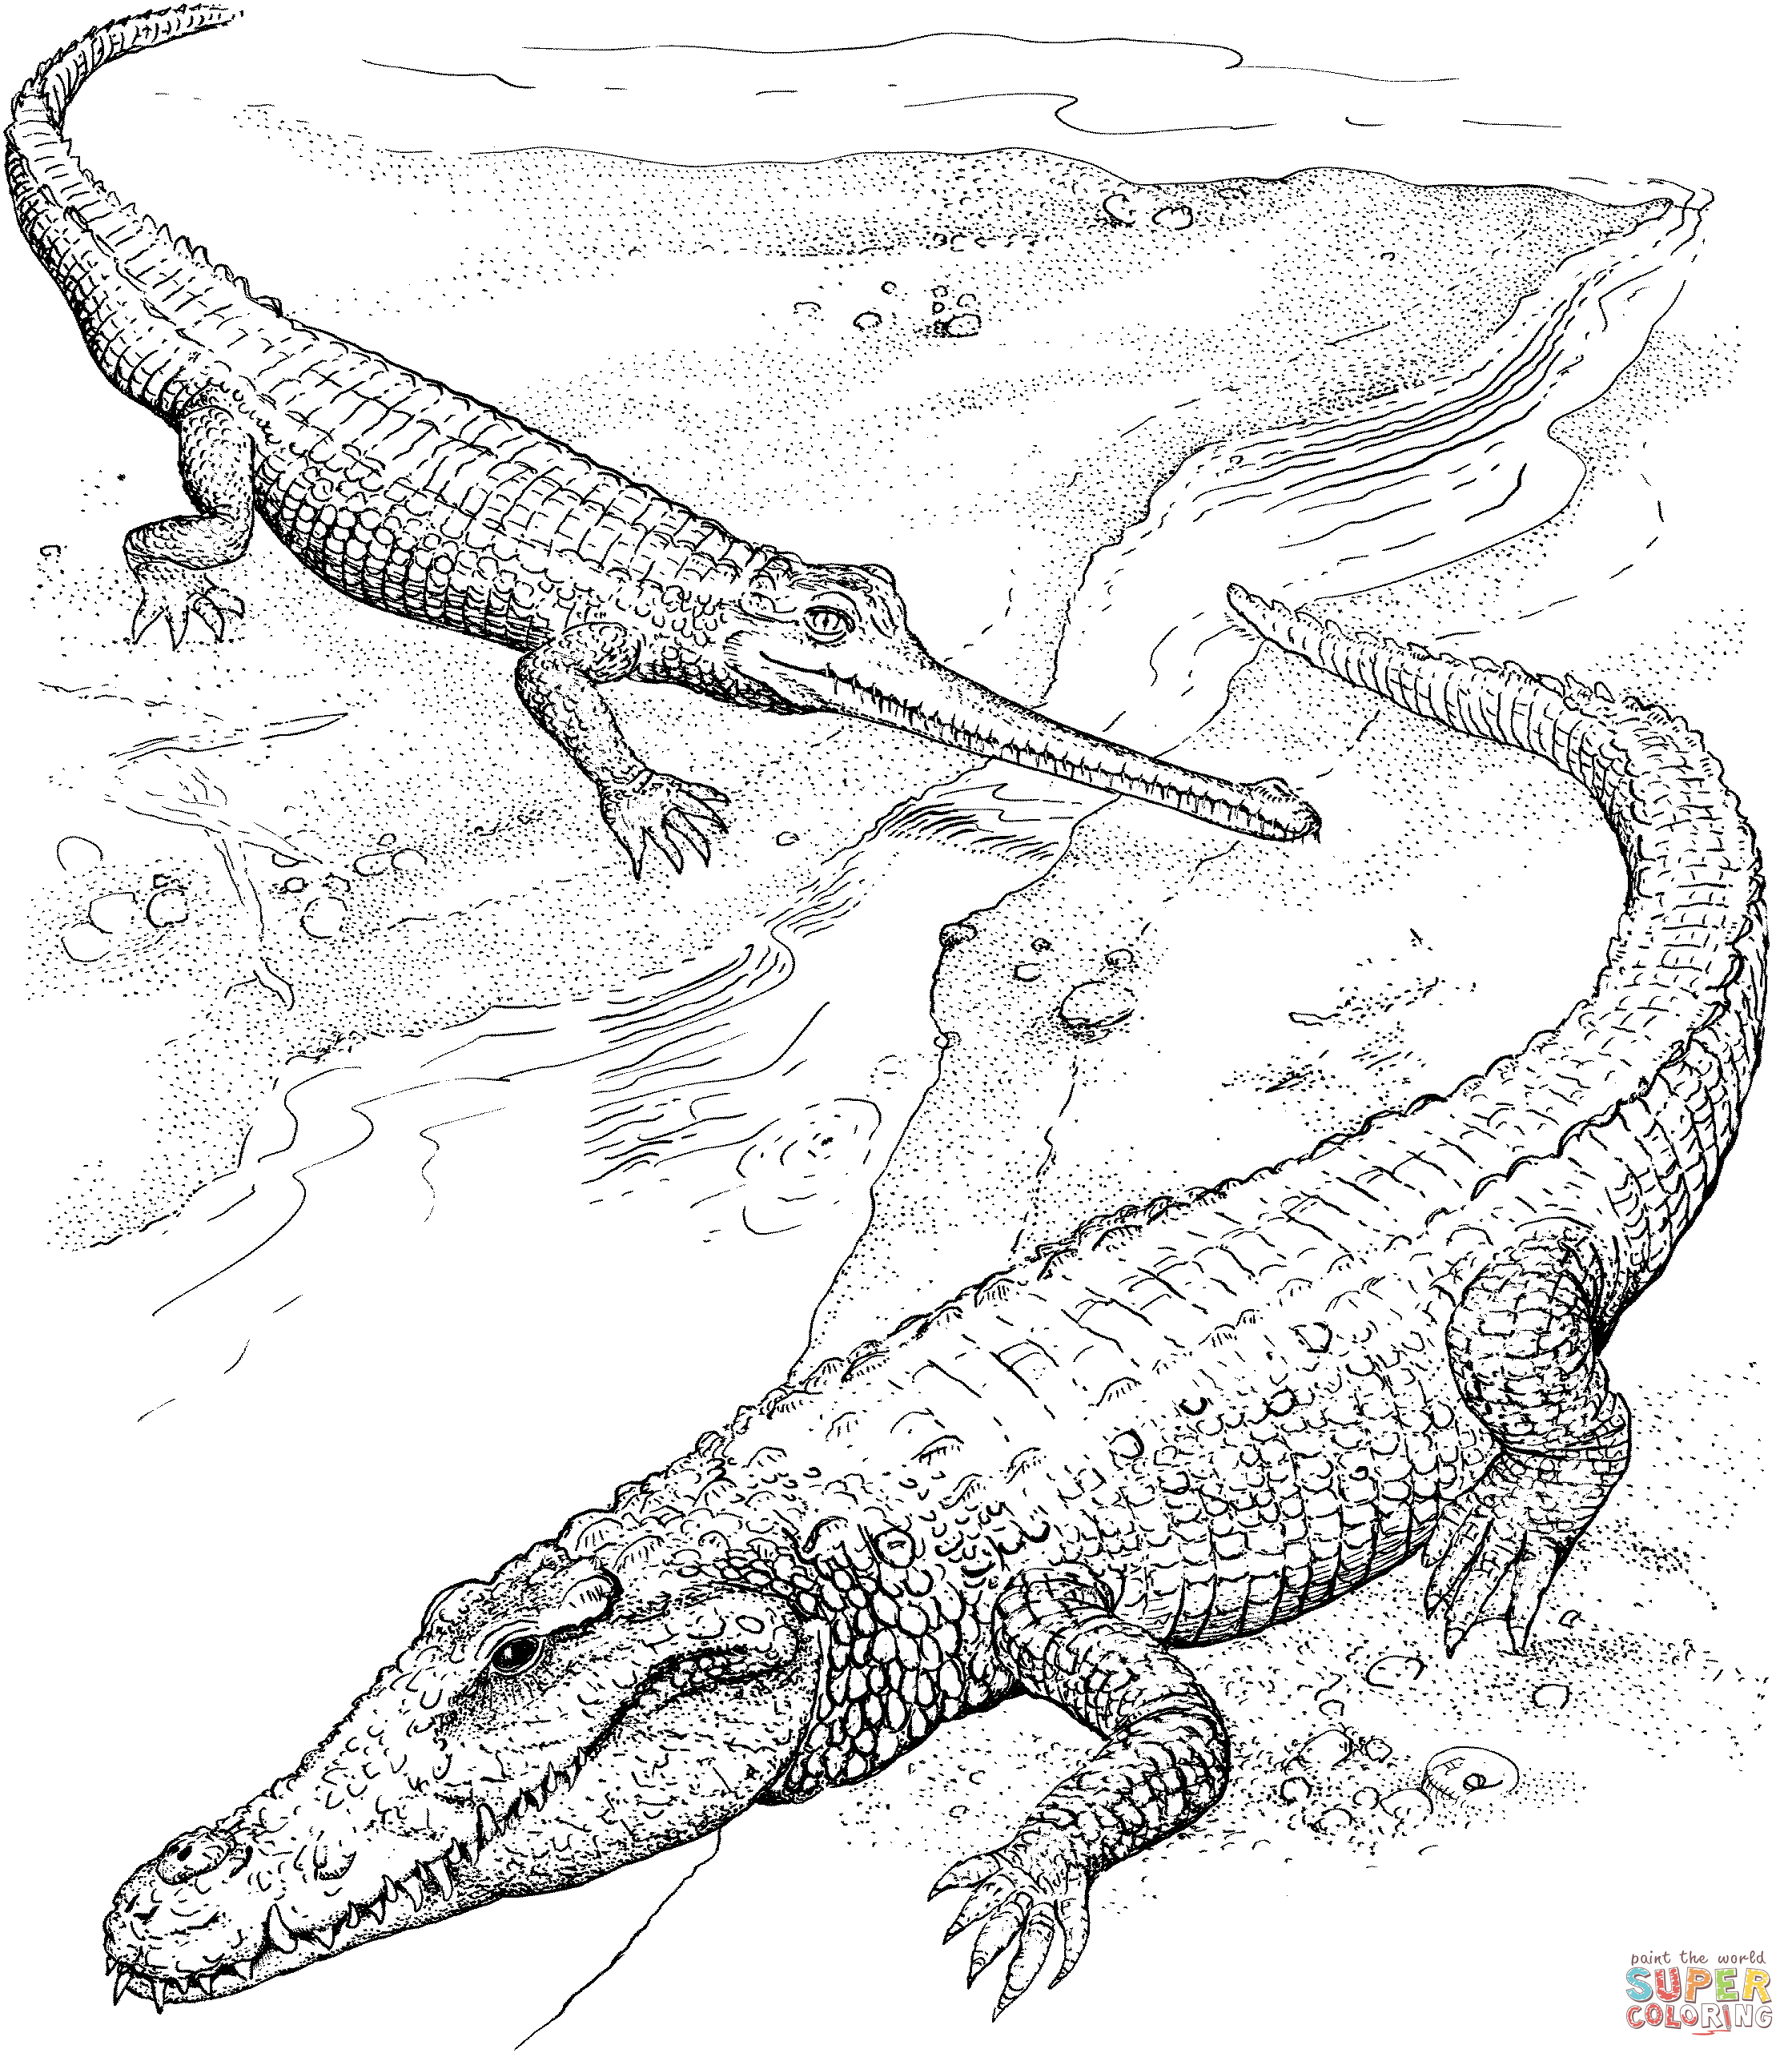 Coloring Page Alligator Crocodile Coloring Pages Free Coloring Pages